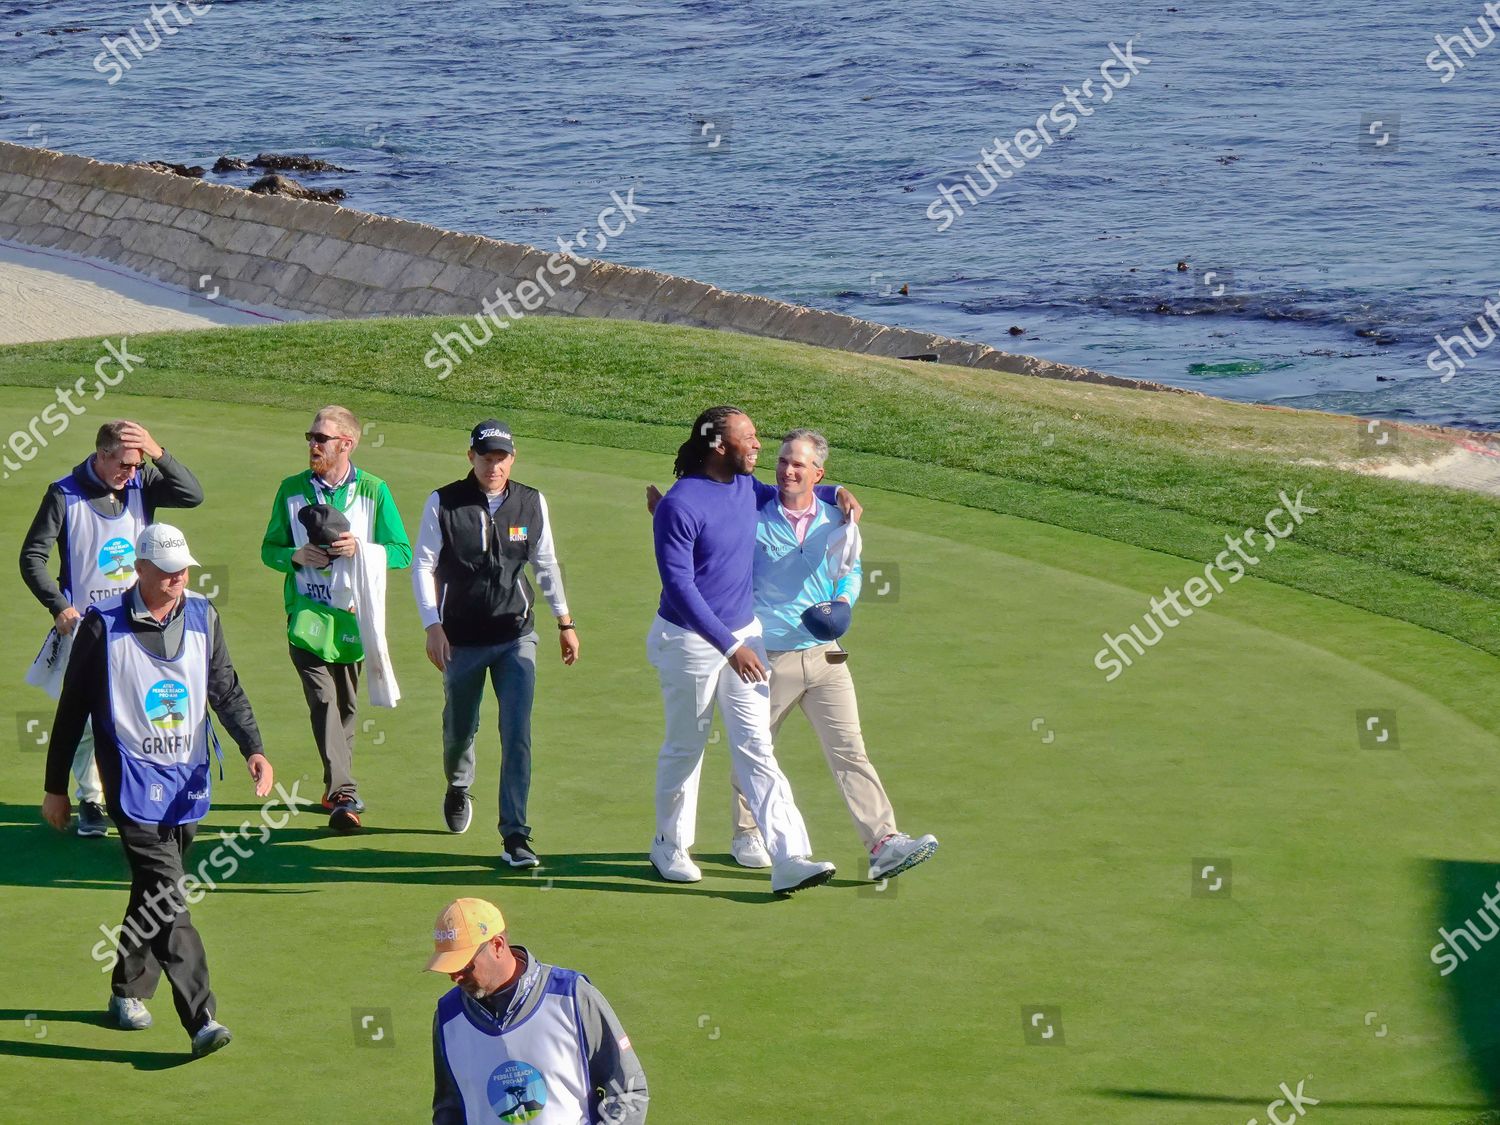 Larry Fitzgerald At The Pebble Beach Pro-Am